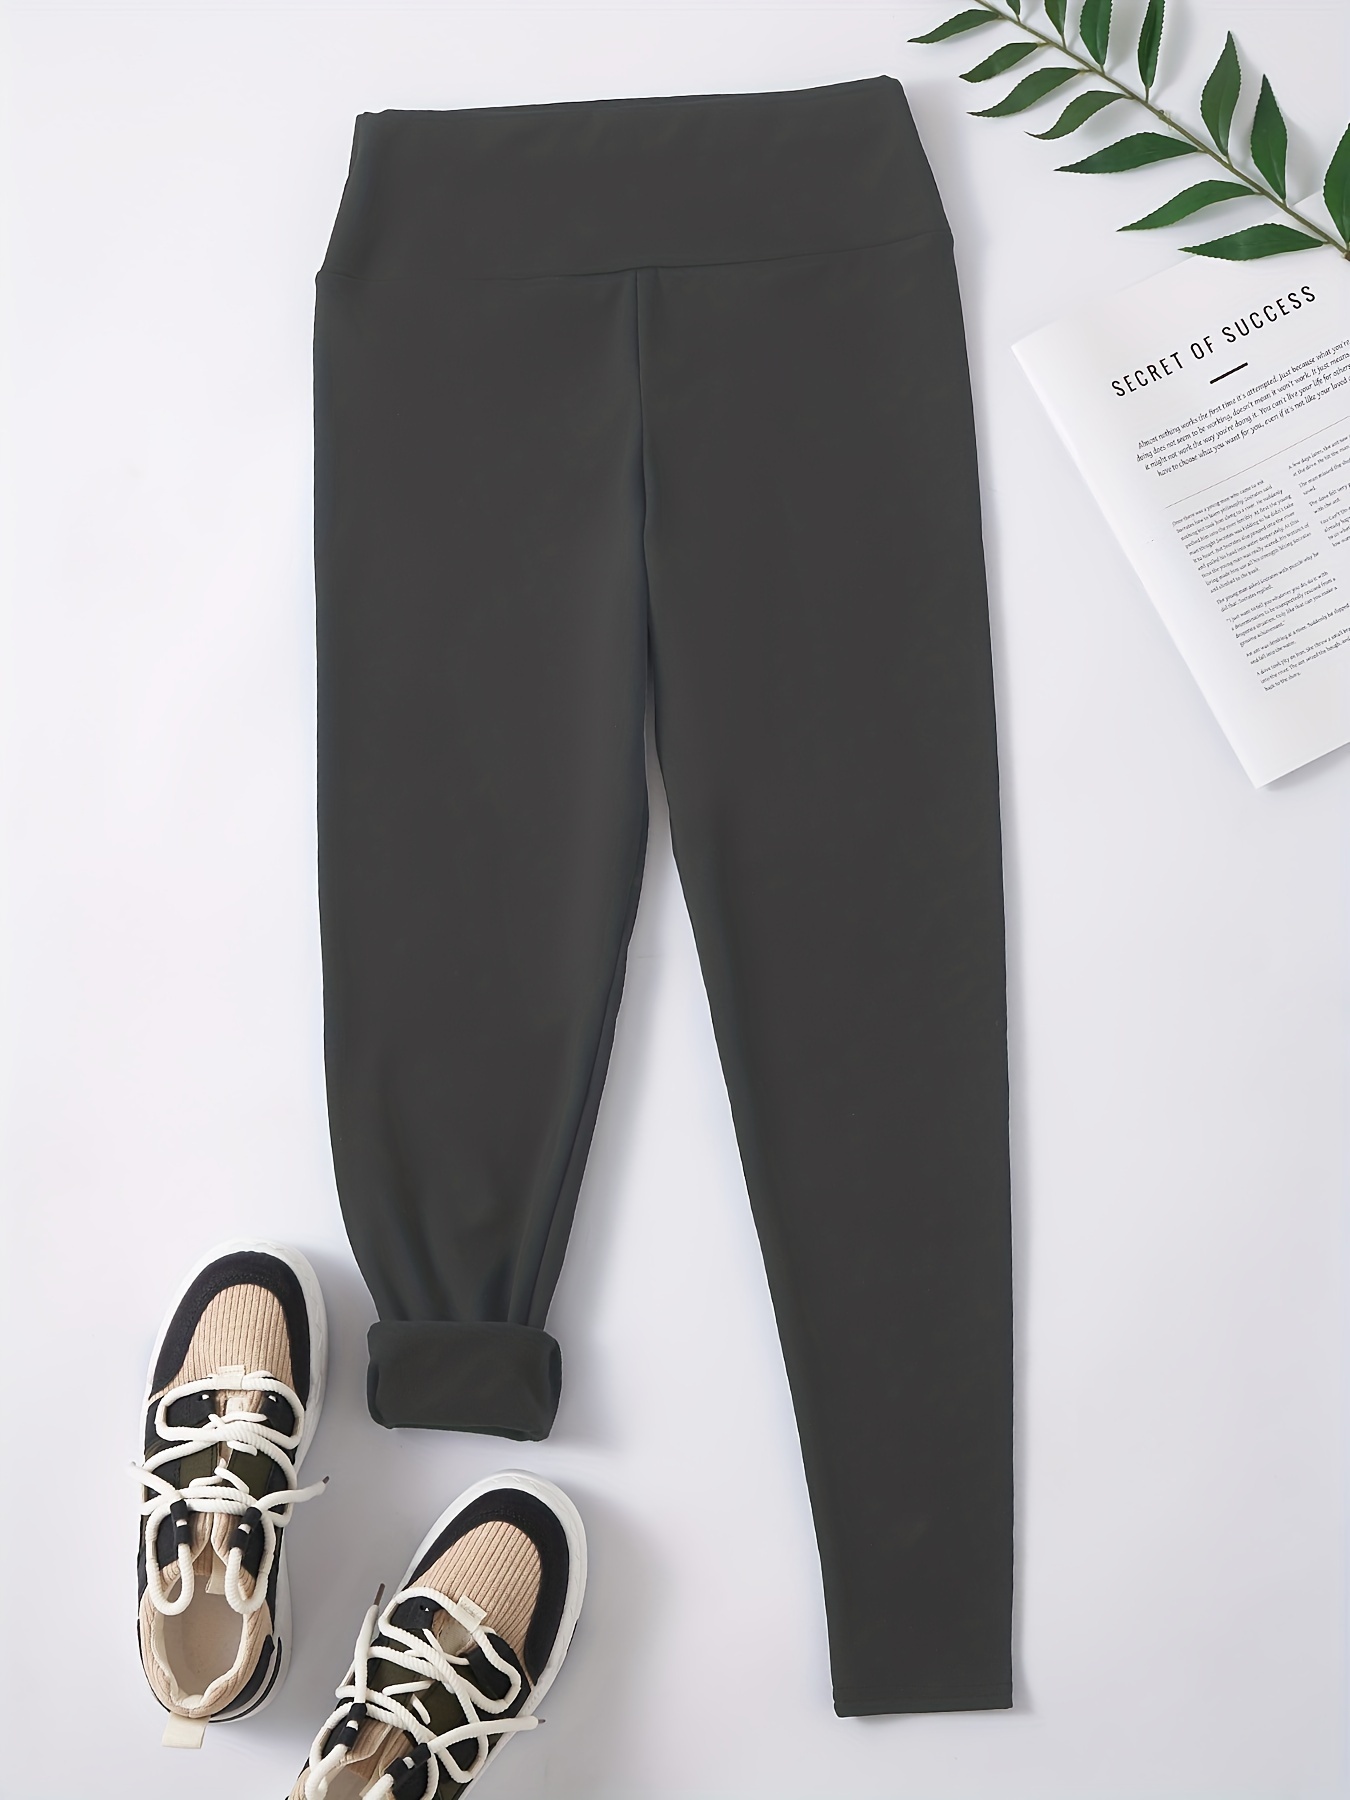 Thick Fleece Lined Warm Leggings For Women High Waisted High